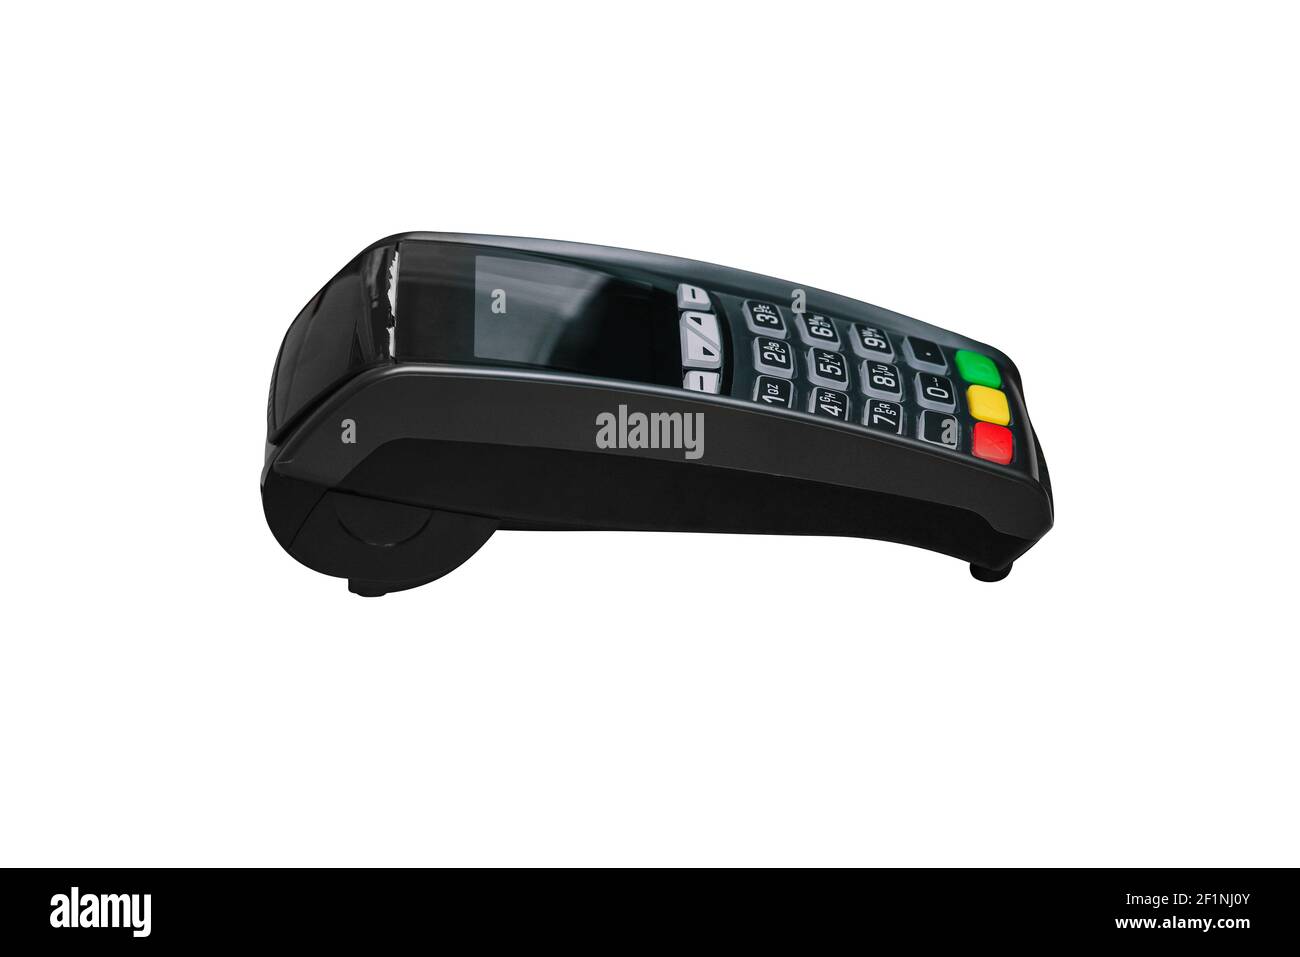 POS payment terminal isolated on white background. Payment by credit card or mobile phone. Device for accepting payment cards. Stock Photo